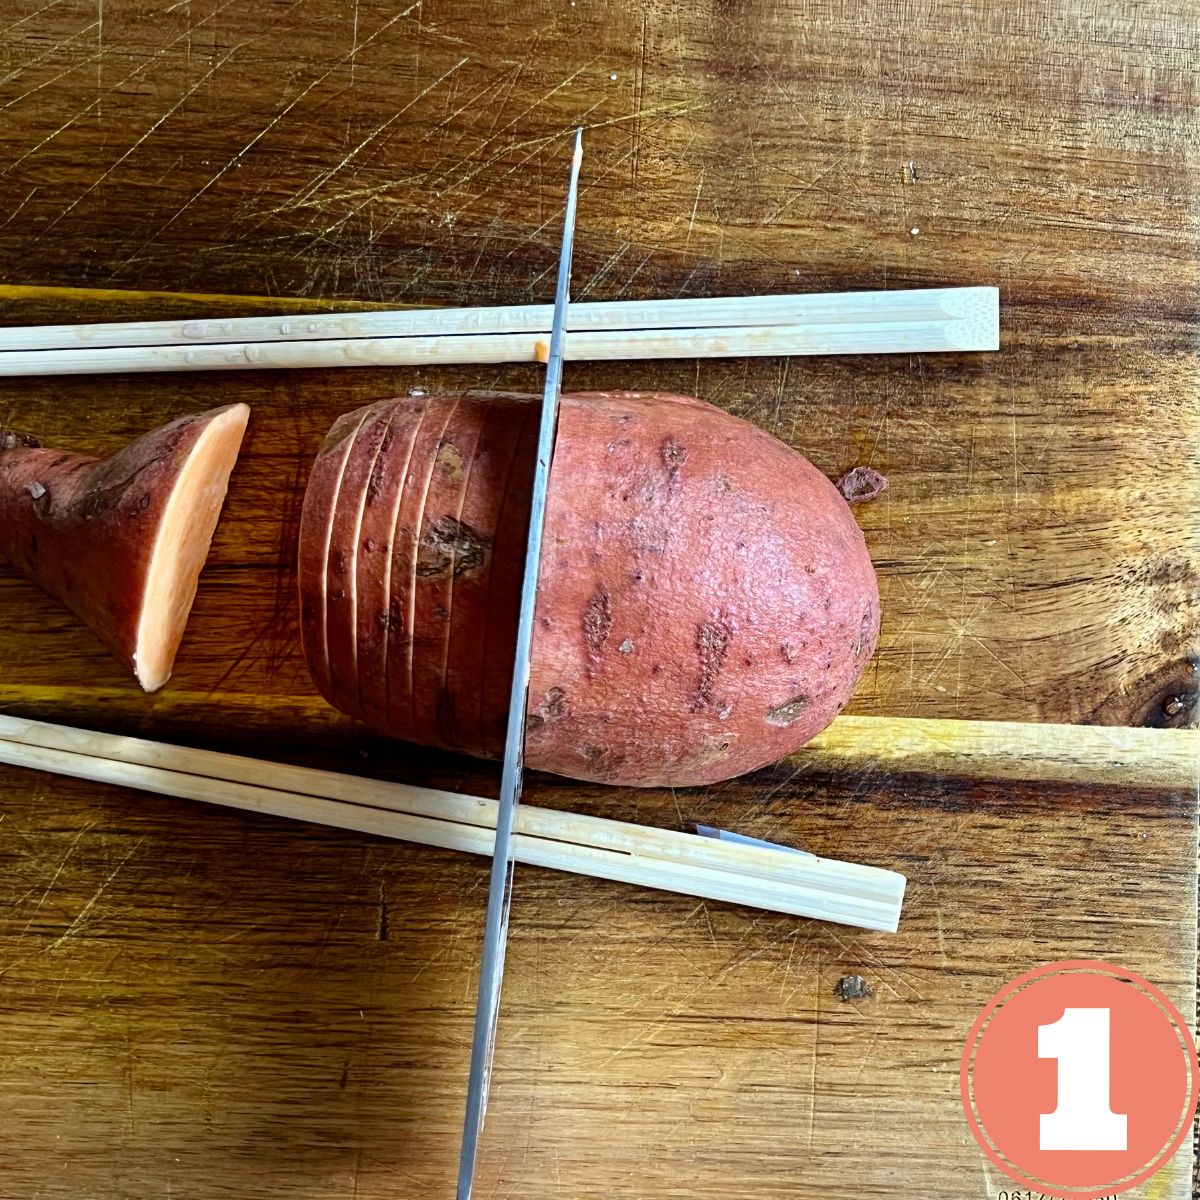 A sweet potato bing sliced with a large knife hasselback style on a wooden cutting board with chop sticks